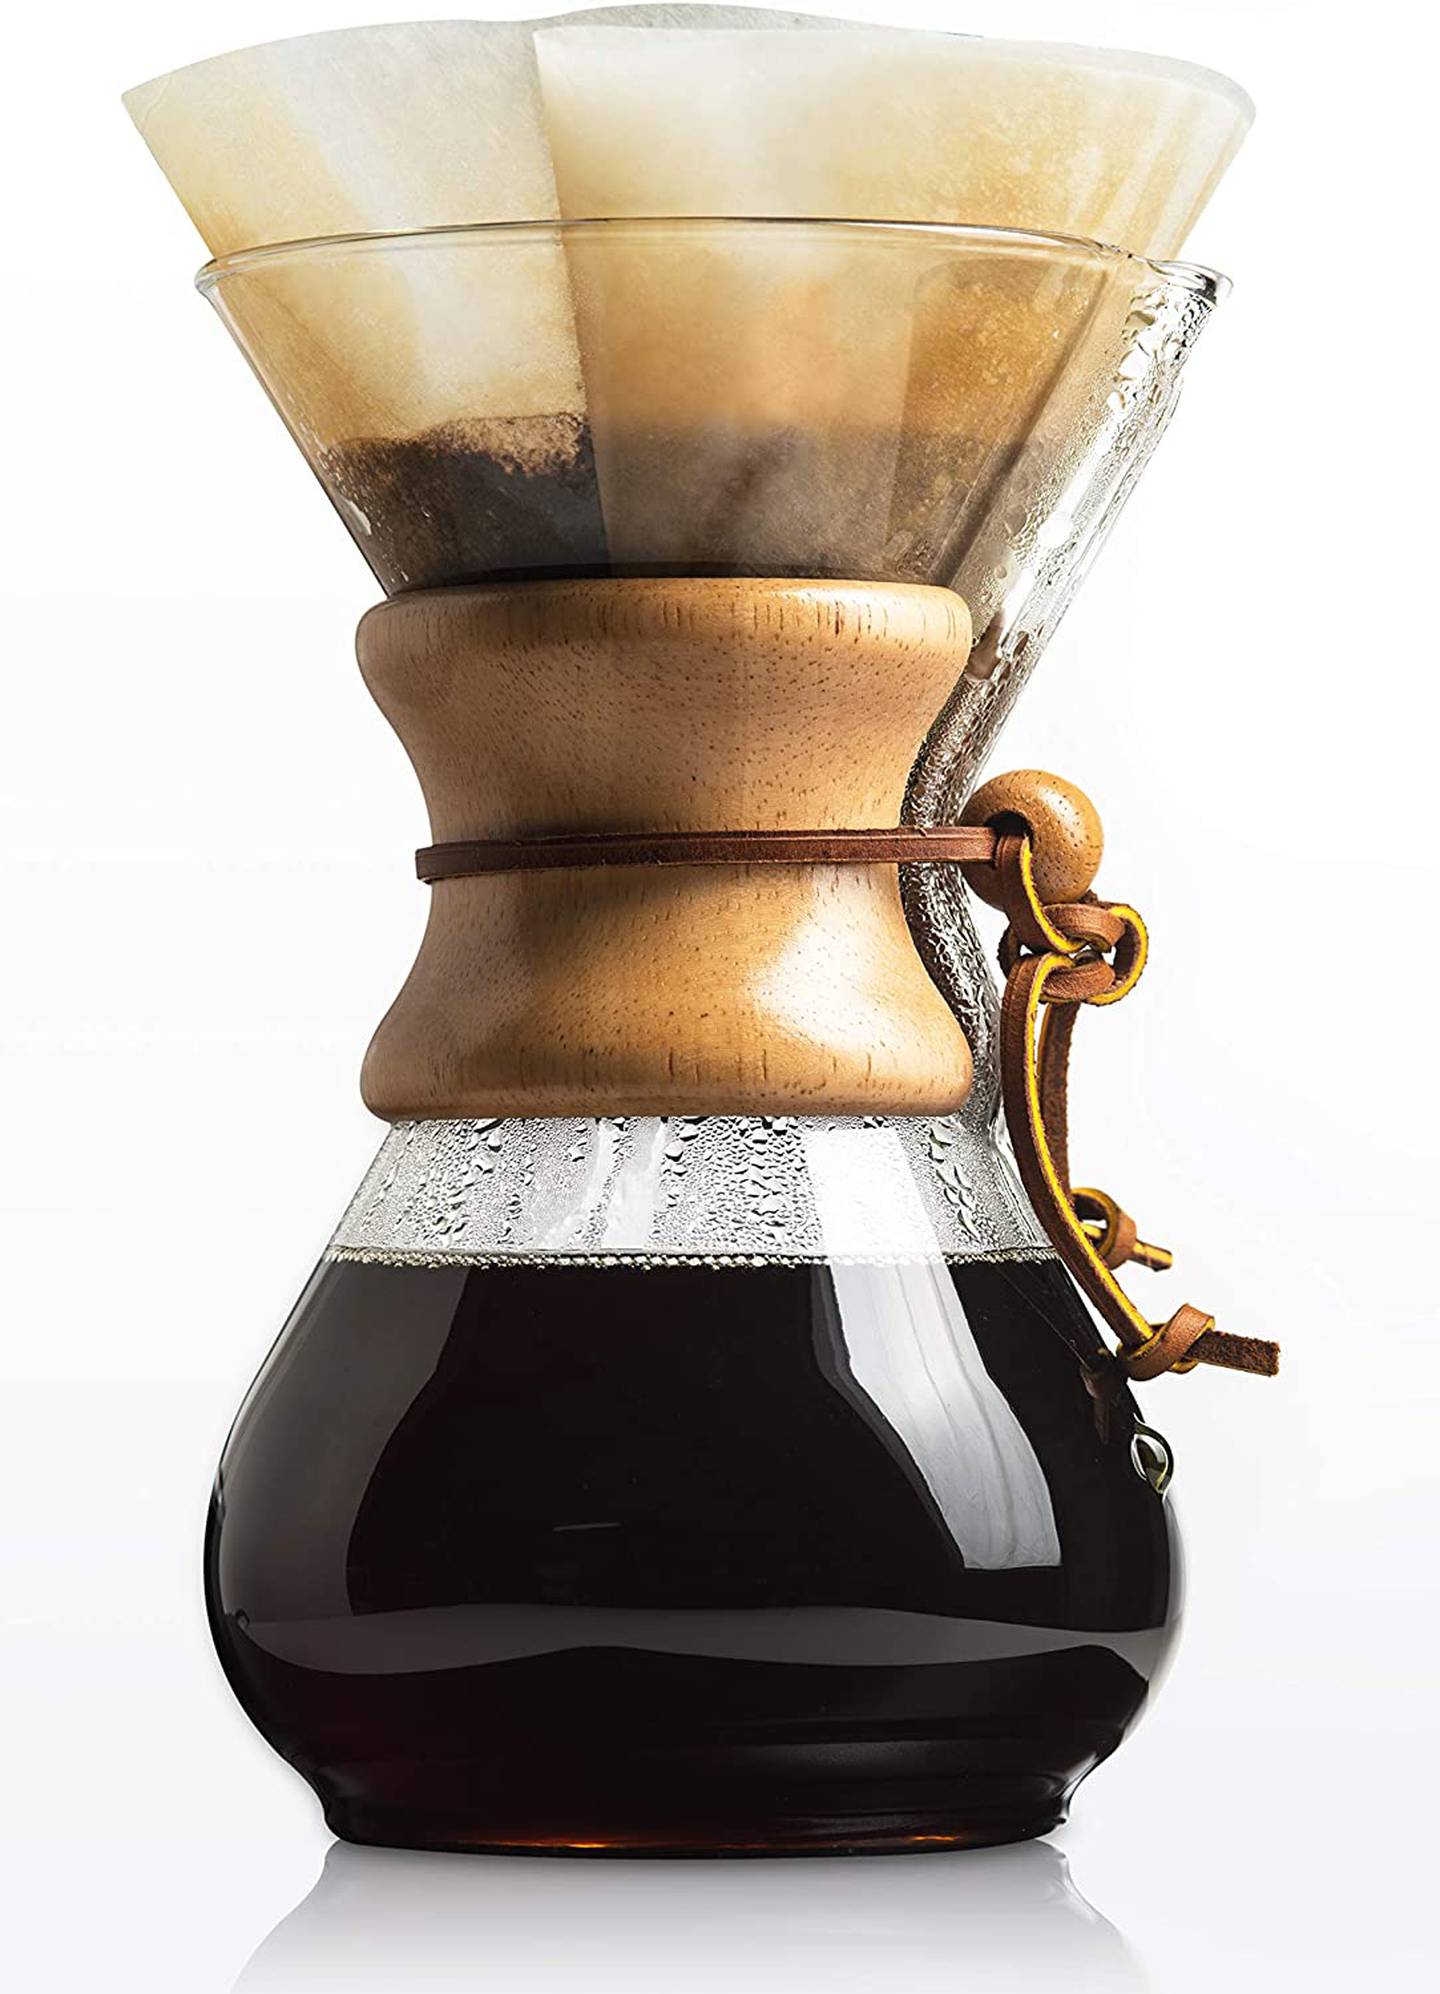 CHEMEX Pour-Over Glass Coffeemaker